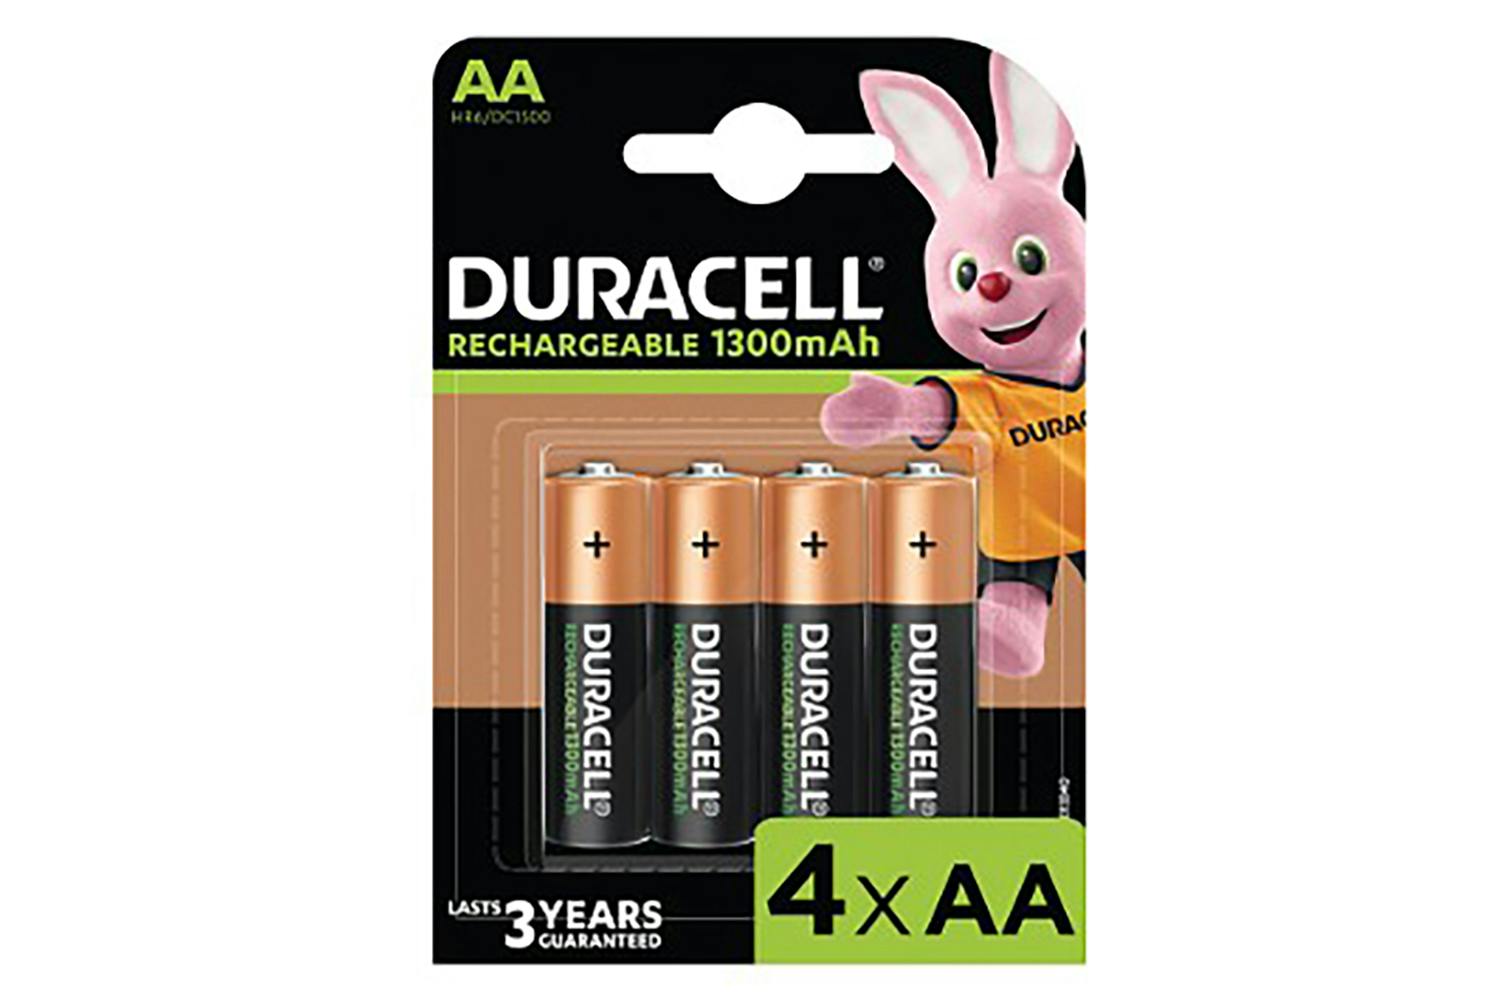 Duracell Rechargeable AA 1300mAh 4 Pack